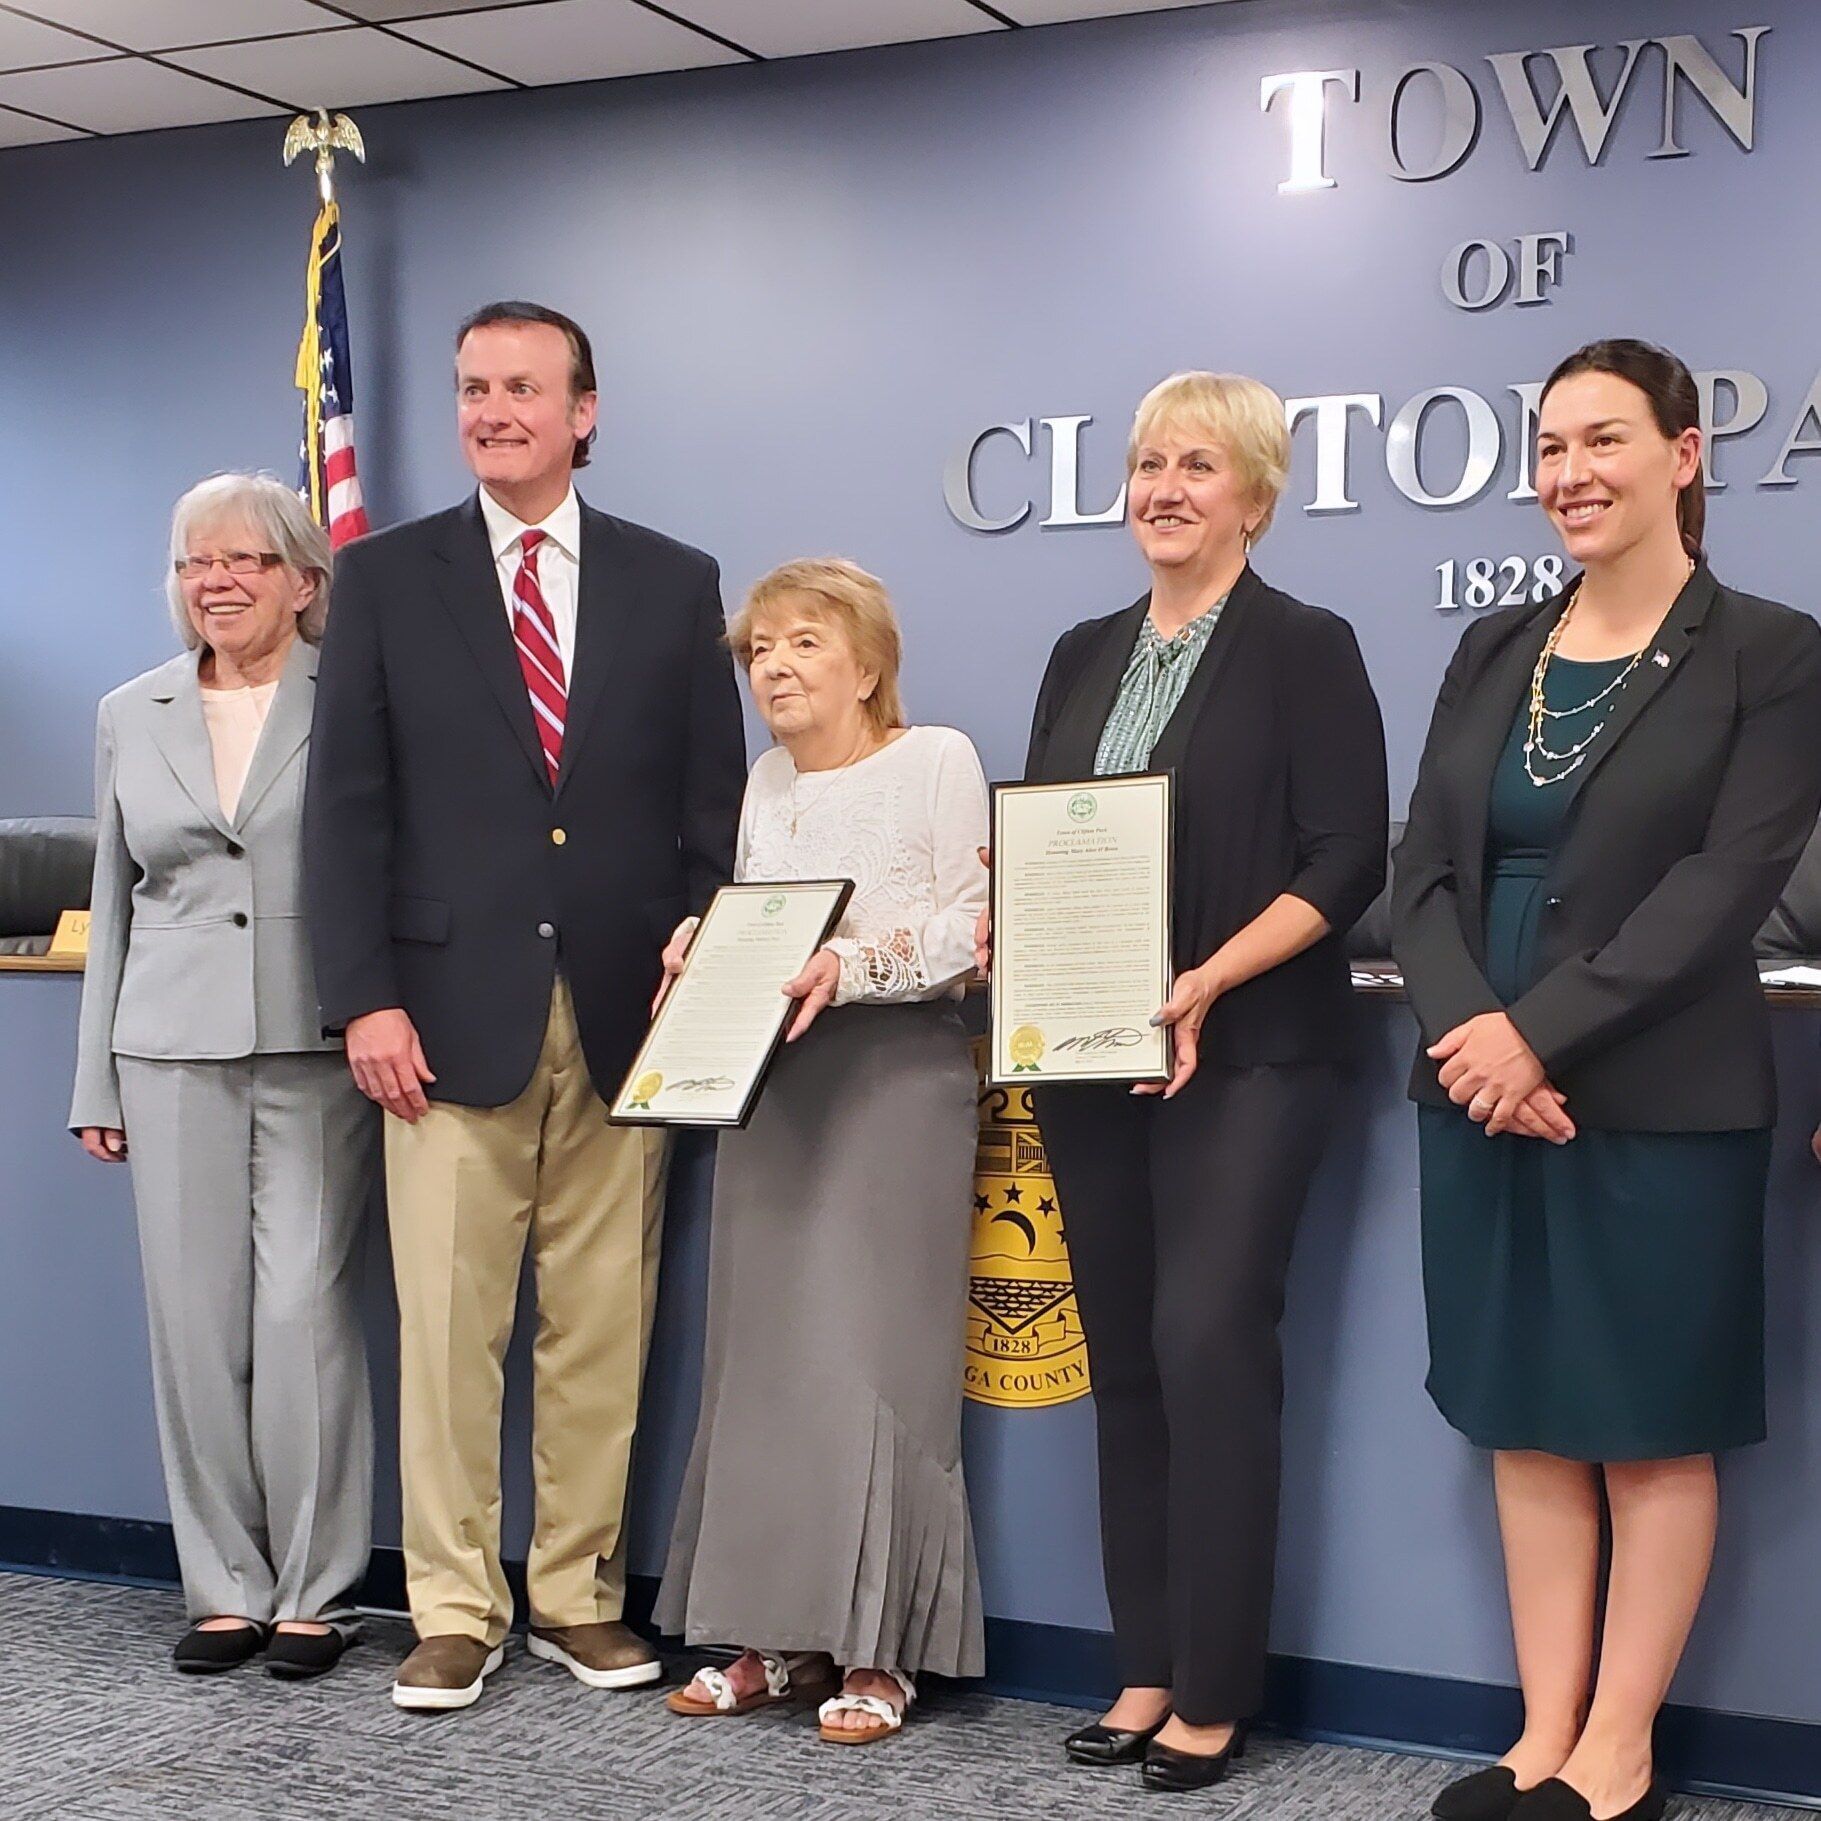 Wow! What awesome and amazing volunteers we have. Check out Care Links of Southern Saratoga County Volunteer of the Year and Golden Inspiration Award recipients, MaryAlice O'Brien and Marilou Pries, being honored at the Town of Clifton Park Board Meeting 